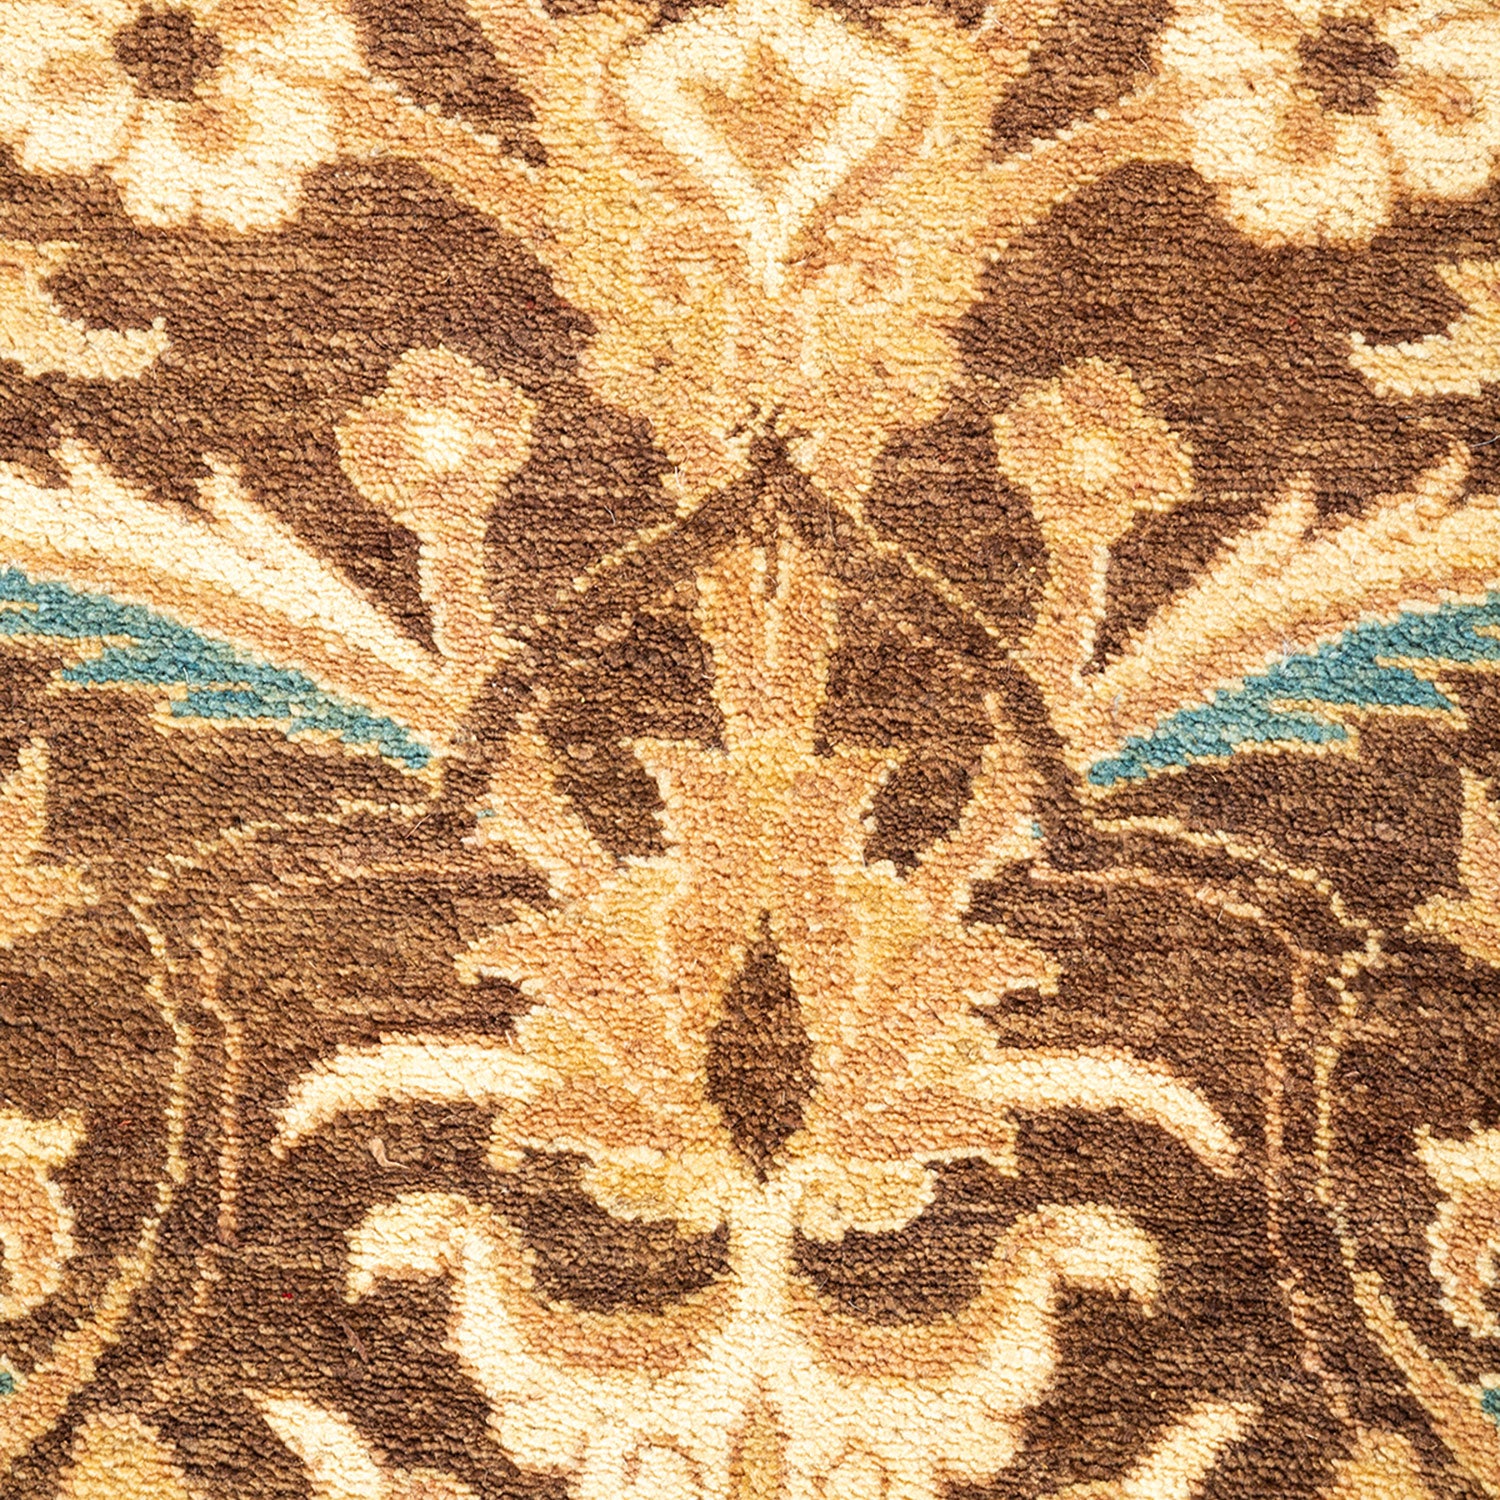 Close-up of an elegant, symmetrical patterned carpet with intricate details